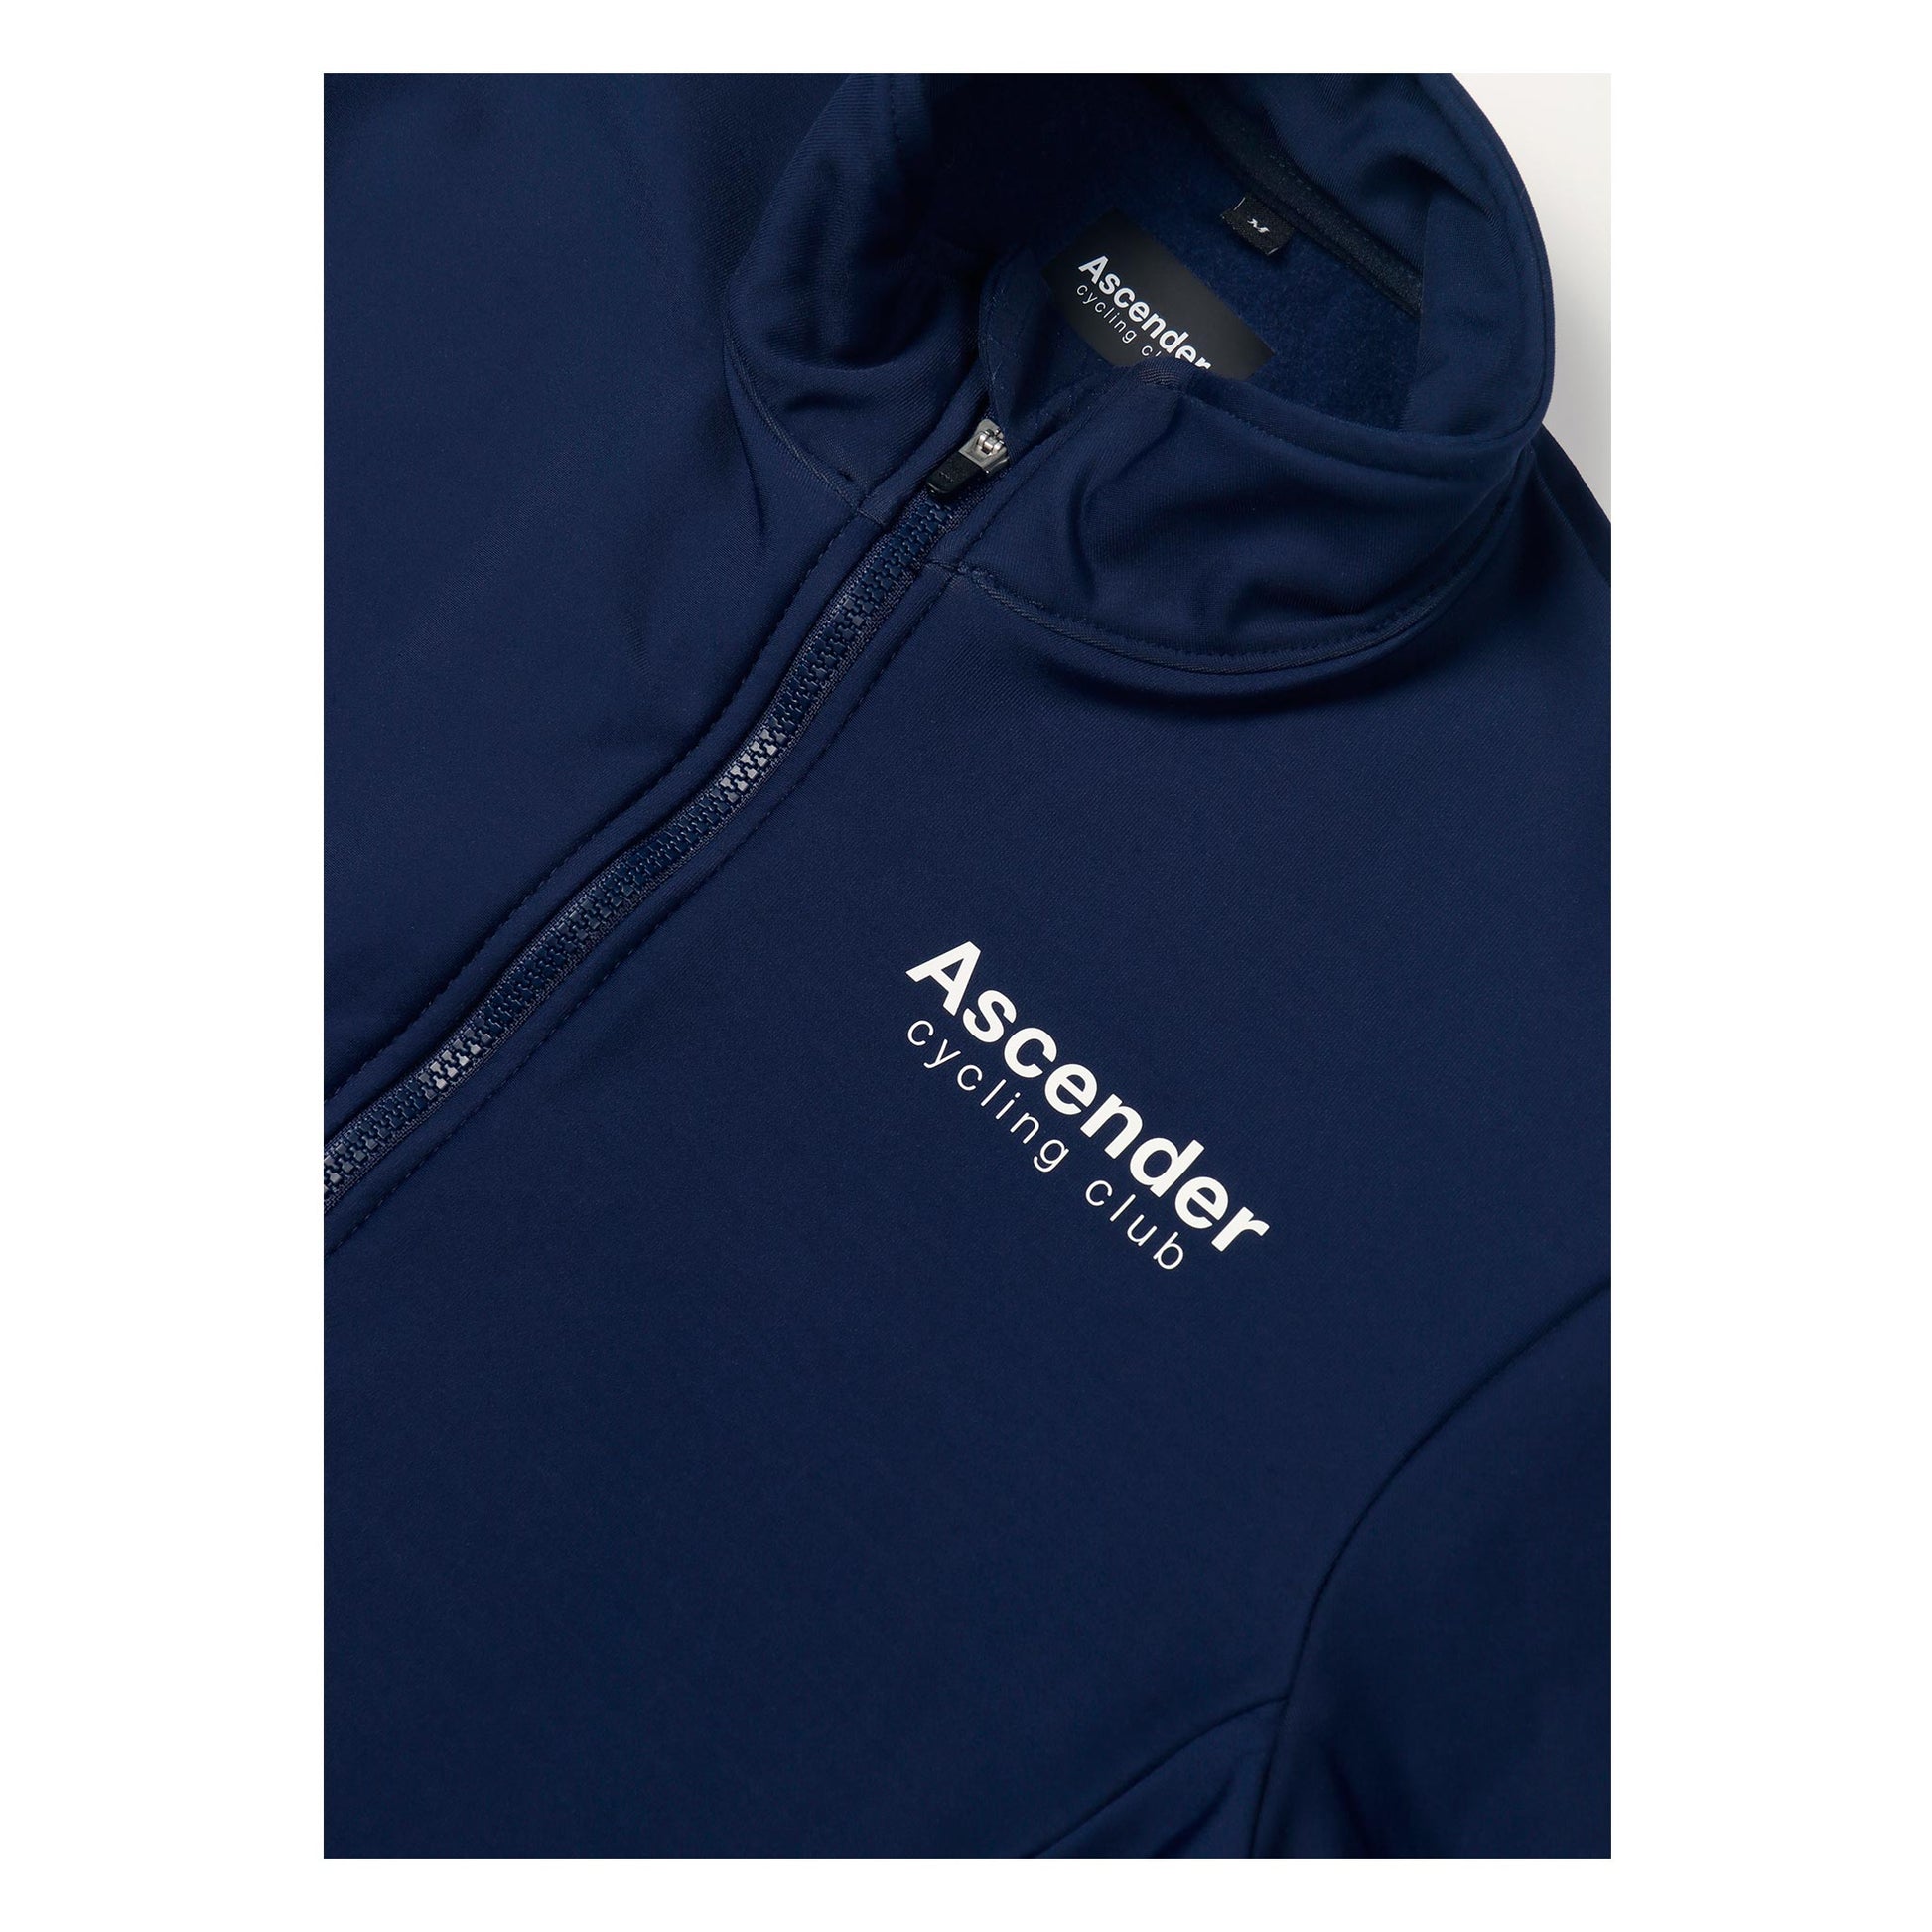 Milano Thermal Long Sleeve Jersey Navy from Ascender Cycling Club Zürich Switzerland Logo View Front